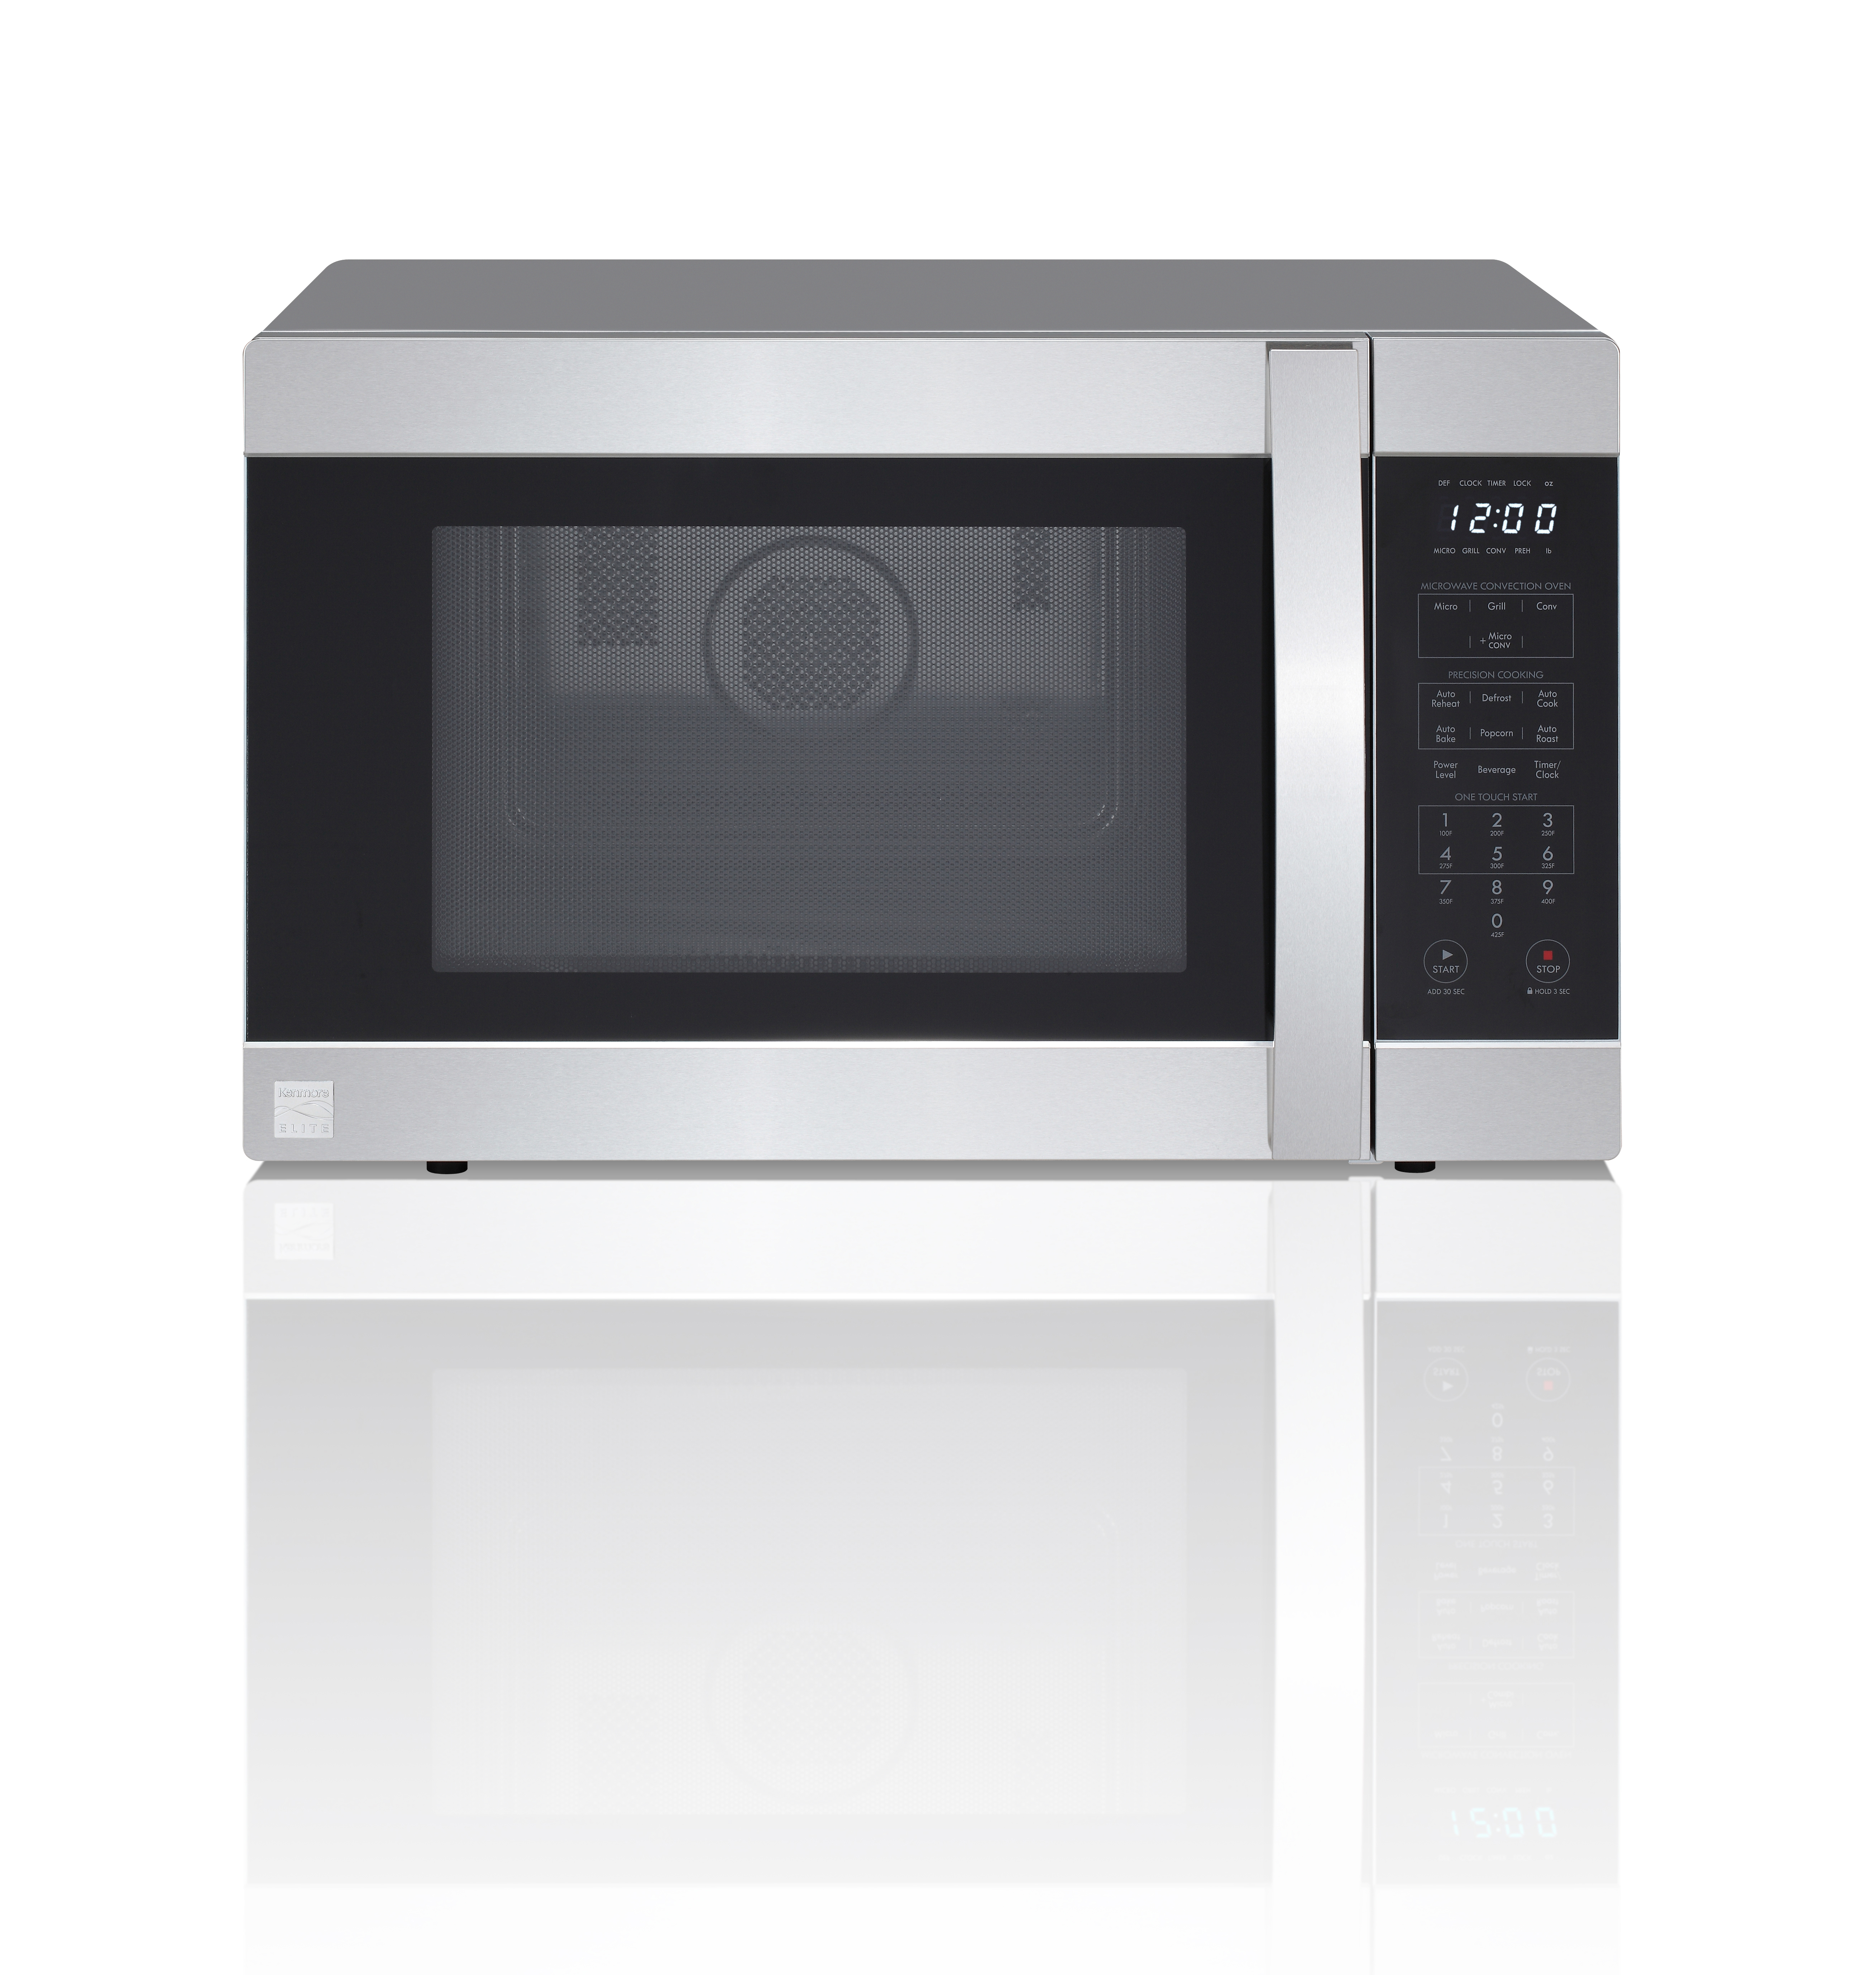 Kenmore 71513 1 5 Cu Ft Countertop Microwave Oven With